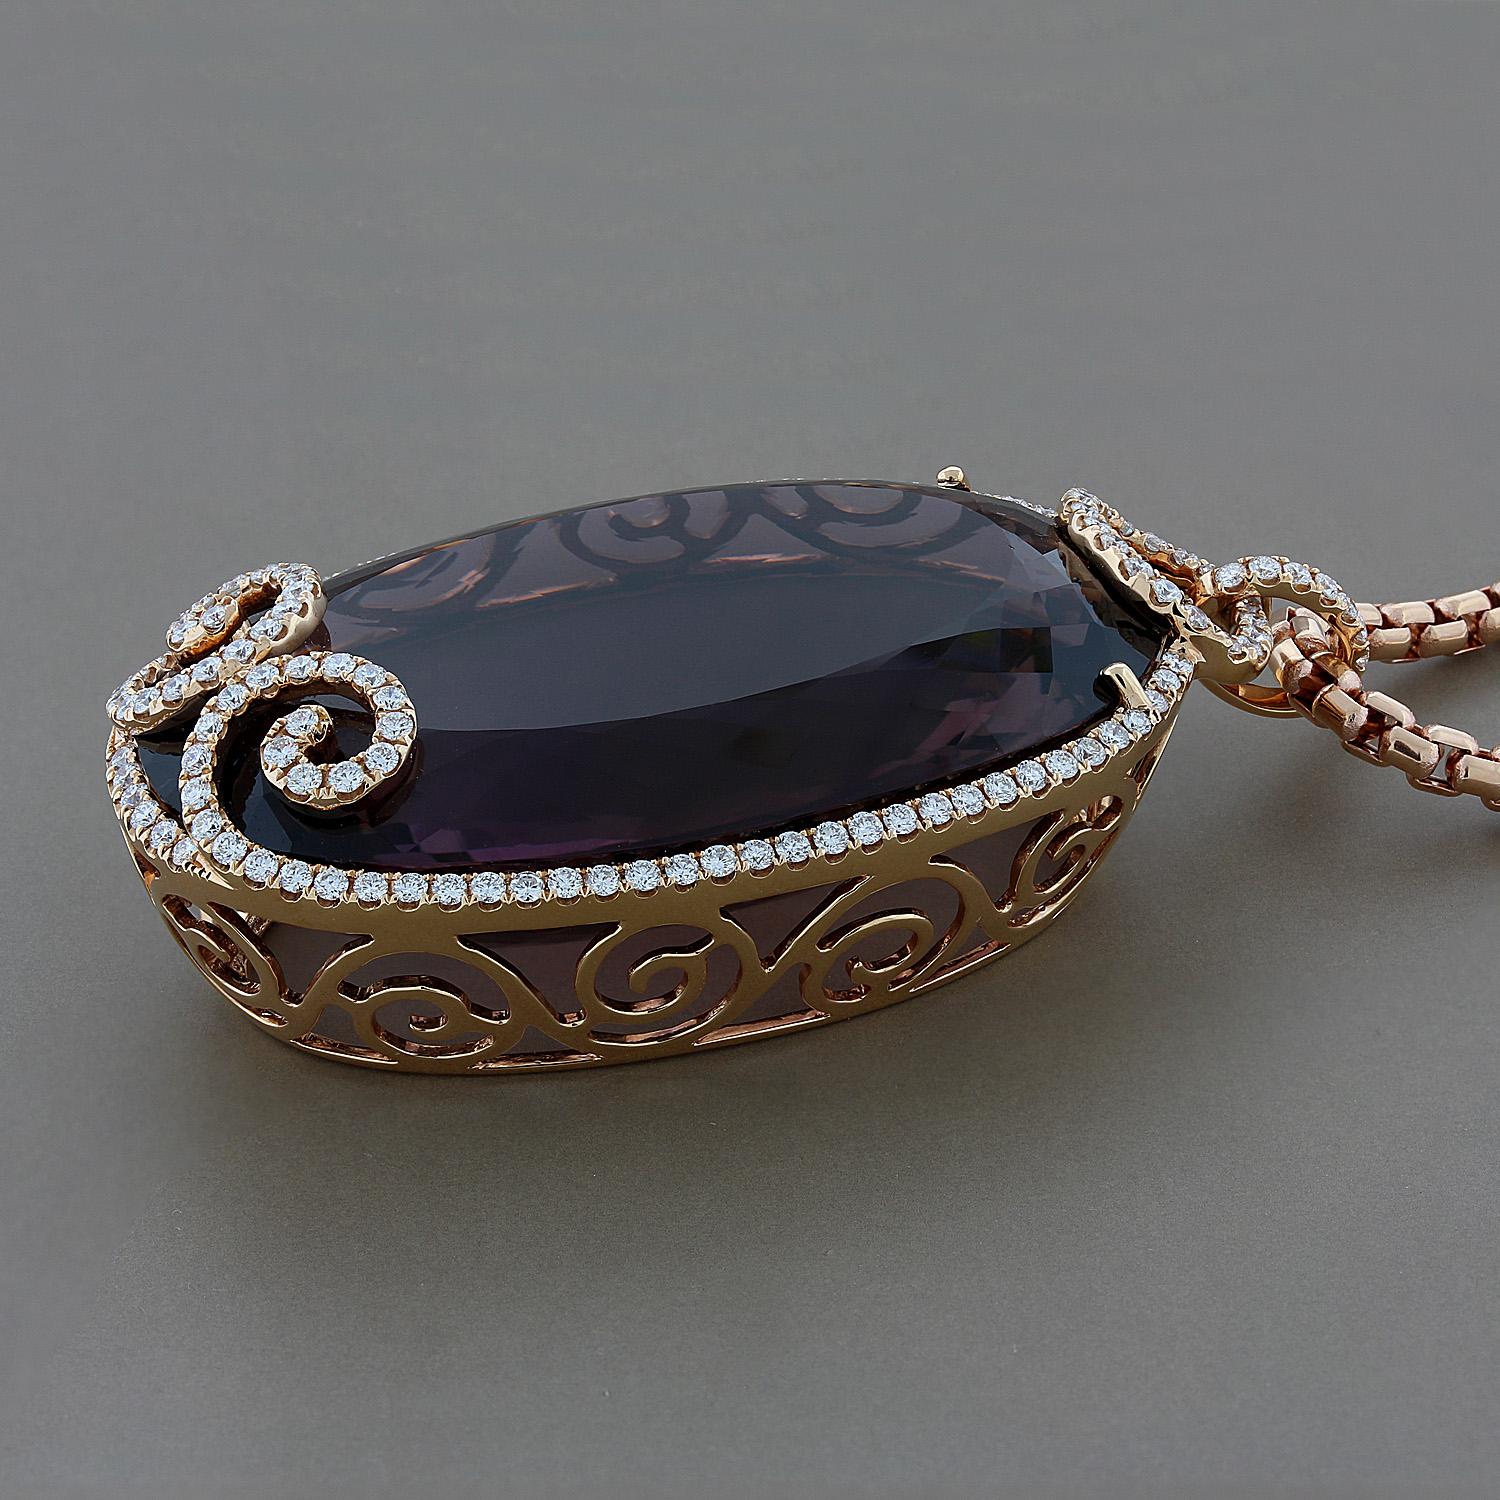 A bold pendant featuring a 187 carat oval shape amethyst gemstone adorned by 2.76 carats of round cut diamonds. The massive amethyst is secured in a 18K rose gold basket setting, and comes with an 18 inch rose gold chain necklace. 

Dimensions: 2.25